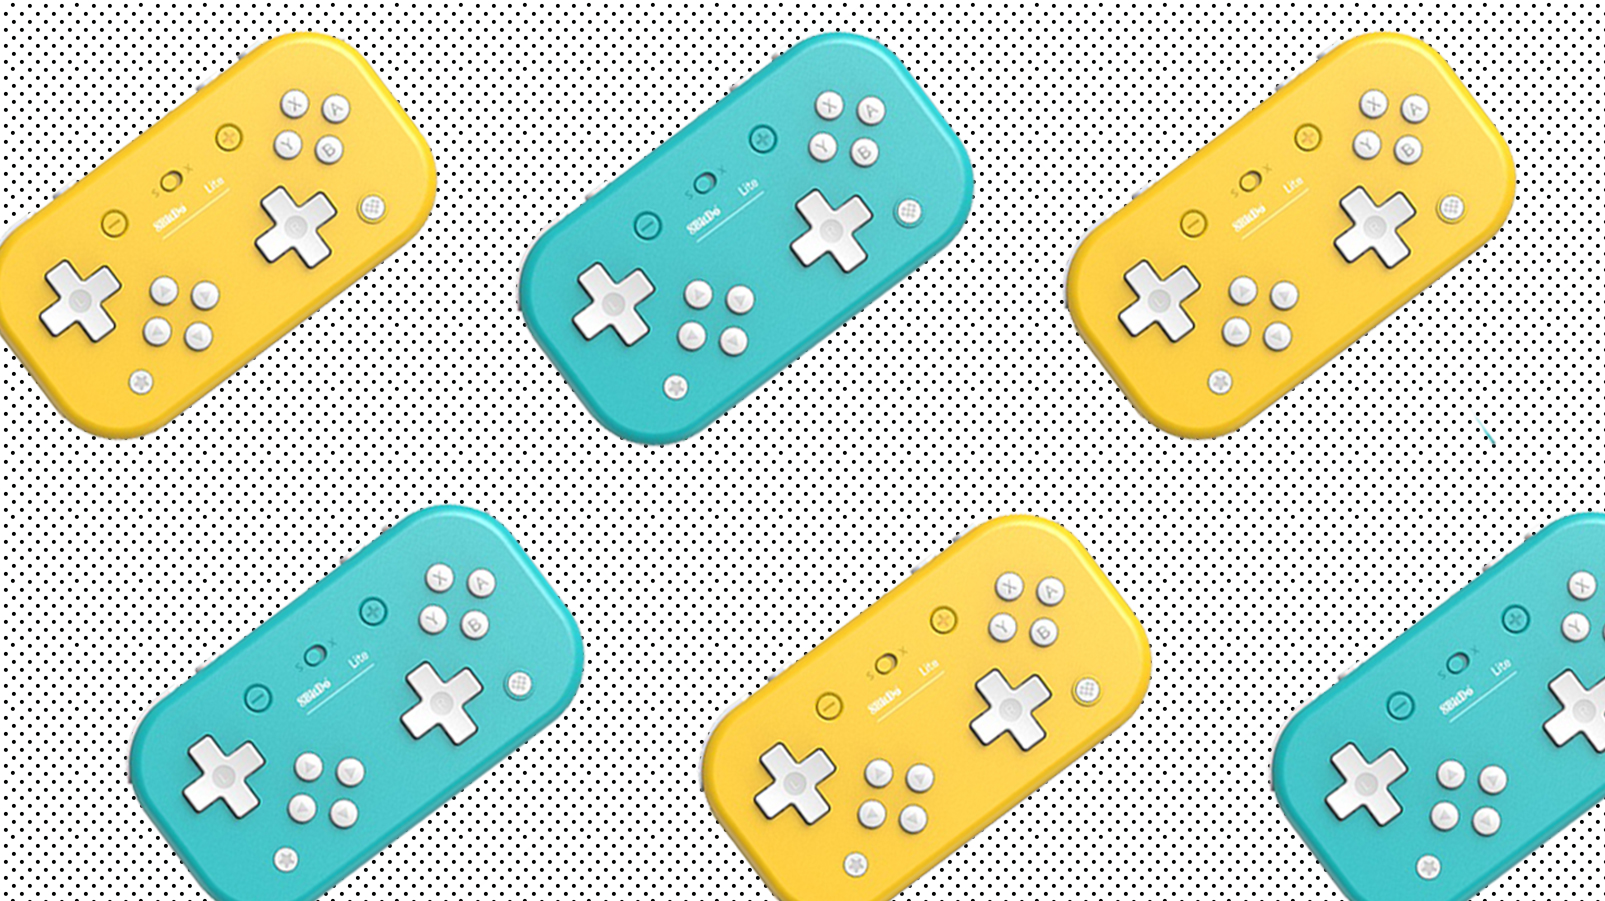 can switch lite be used as a controller